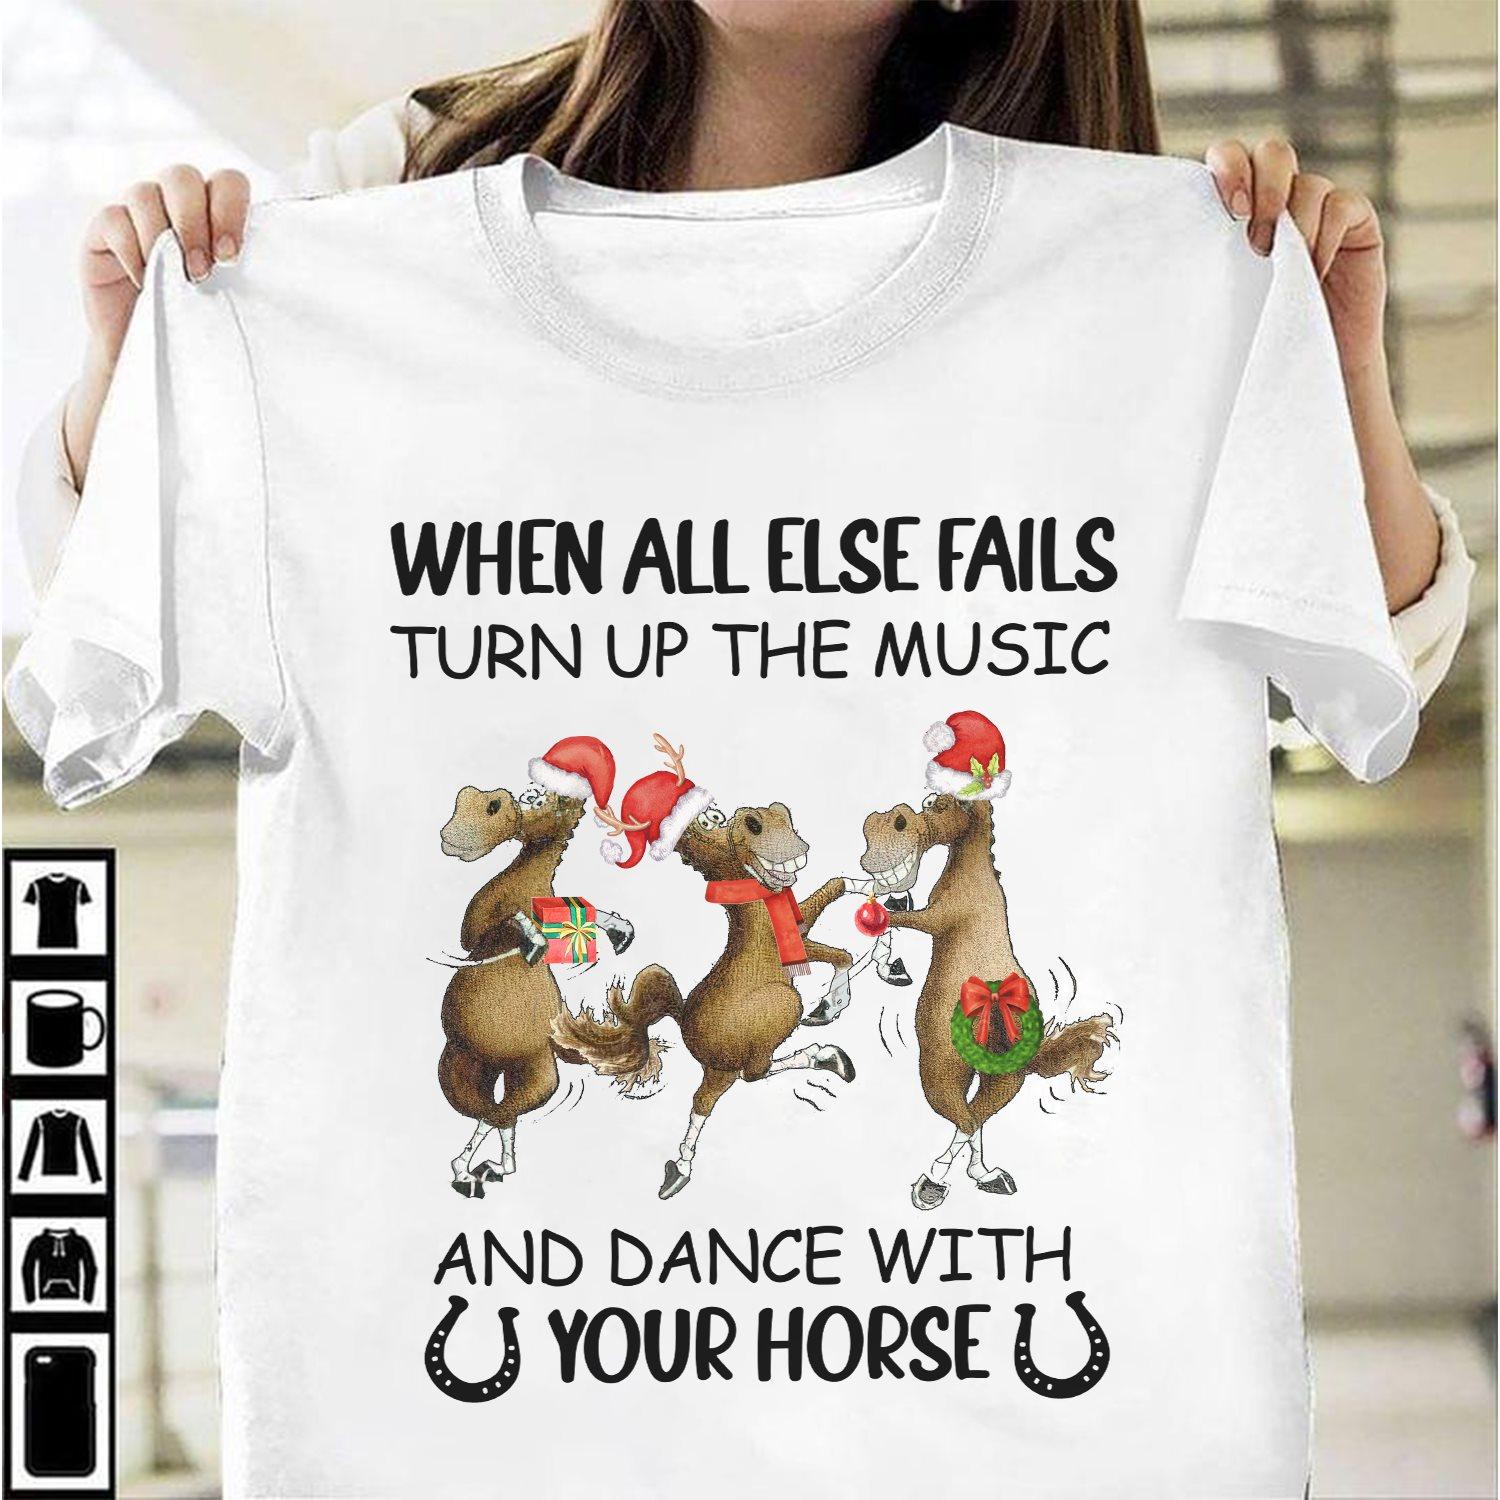 Funny Horse Christmas Gift - When all else fails turn up the music and dance with your horse